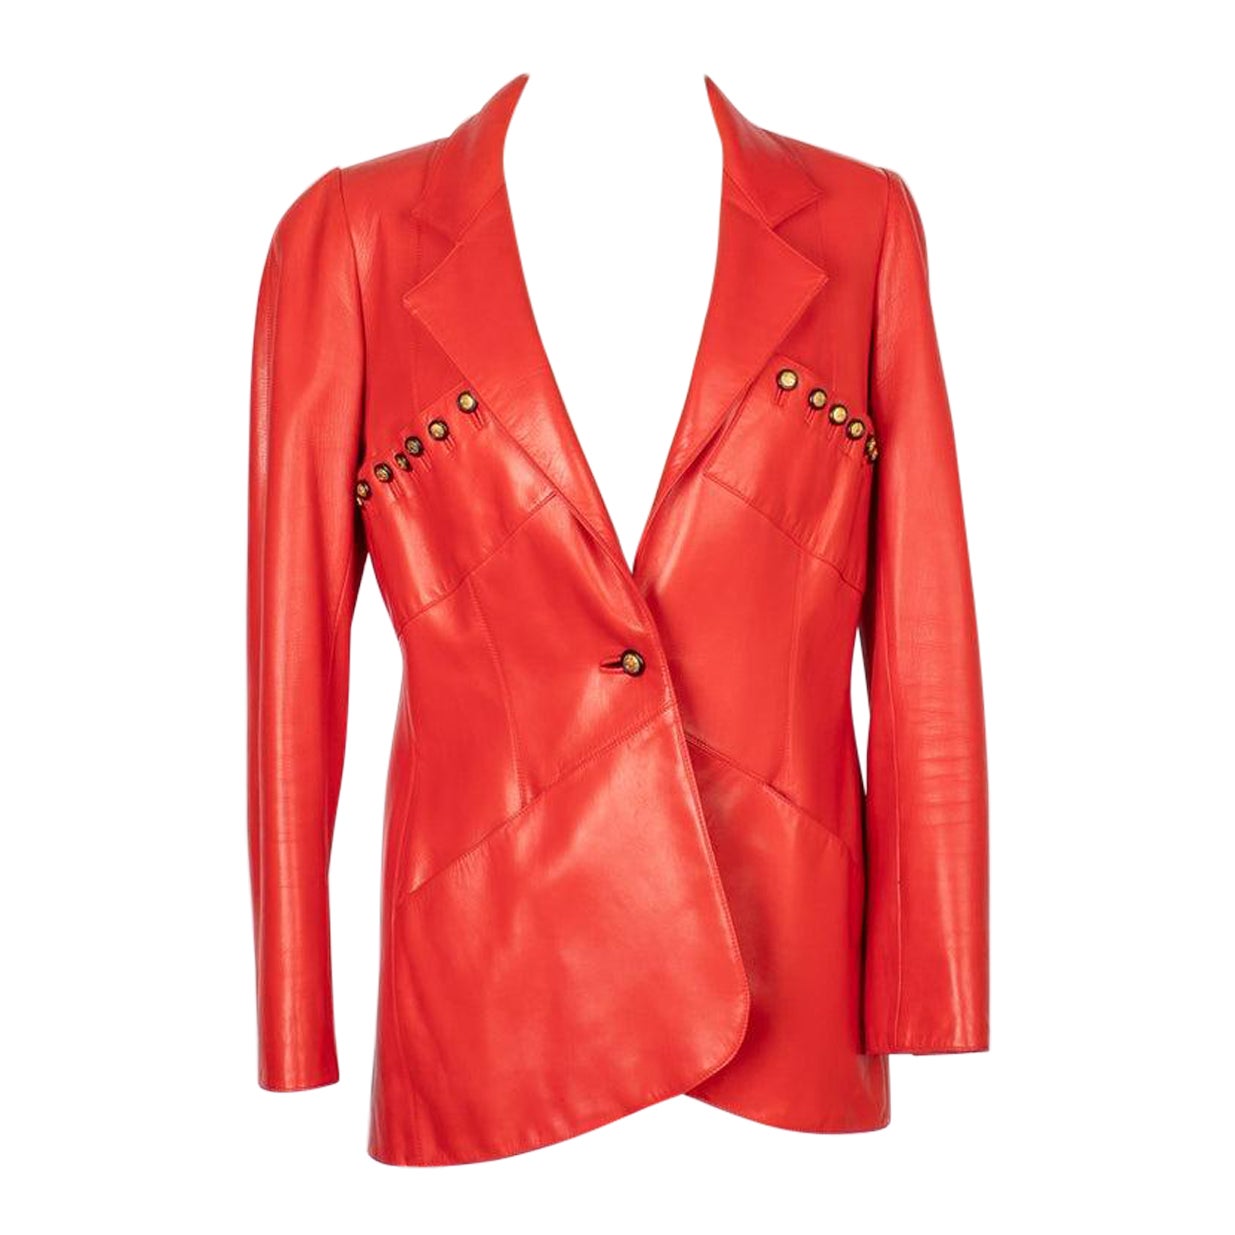 Chanel Red Leather Jacket Haute Couture Spring, 1994 For Sale